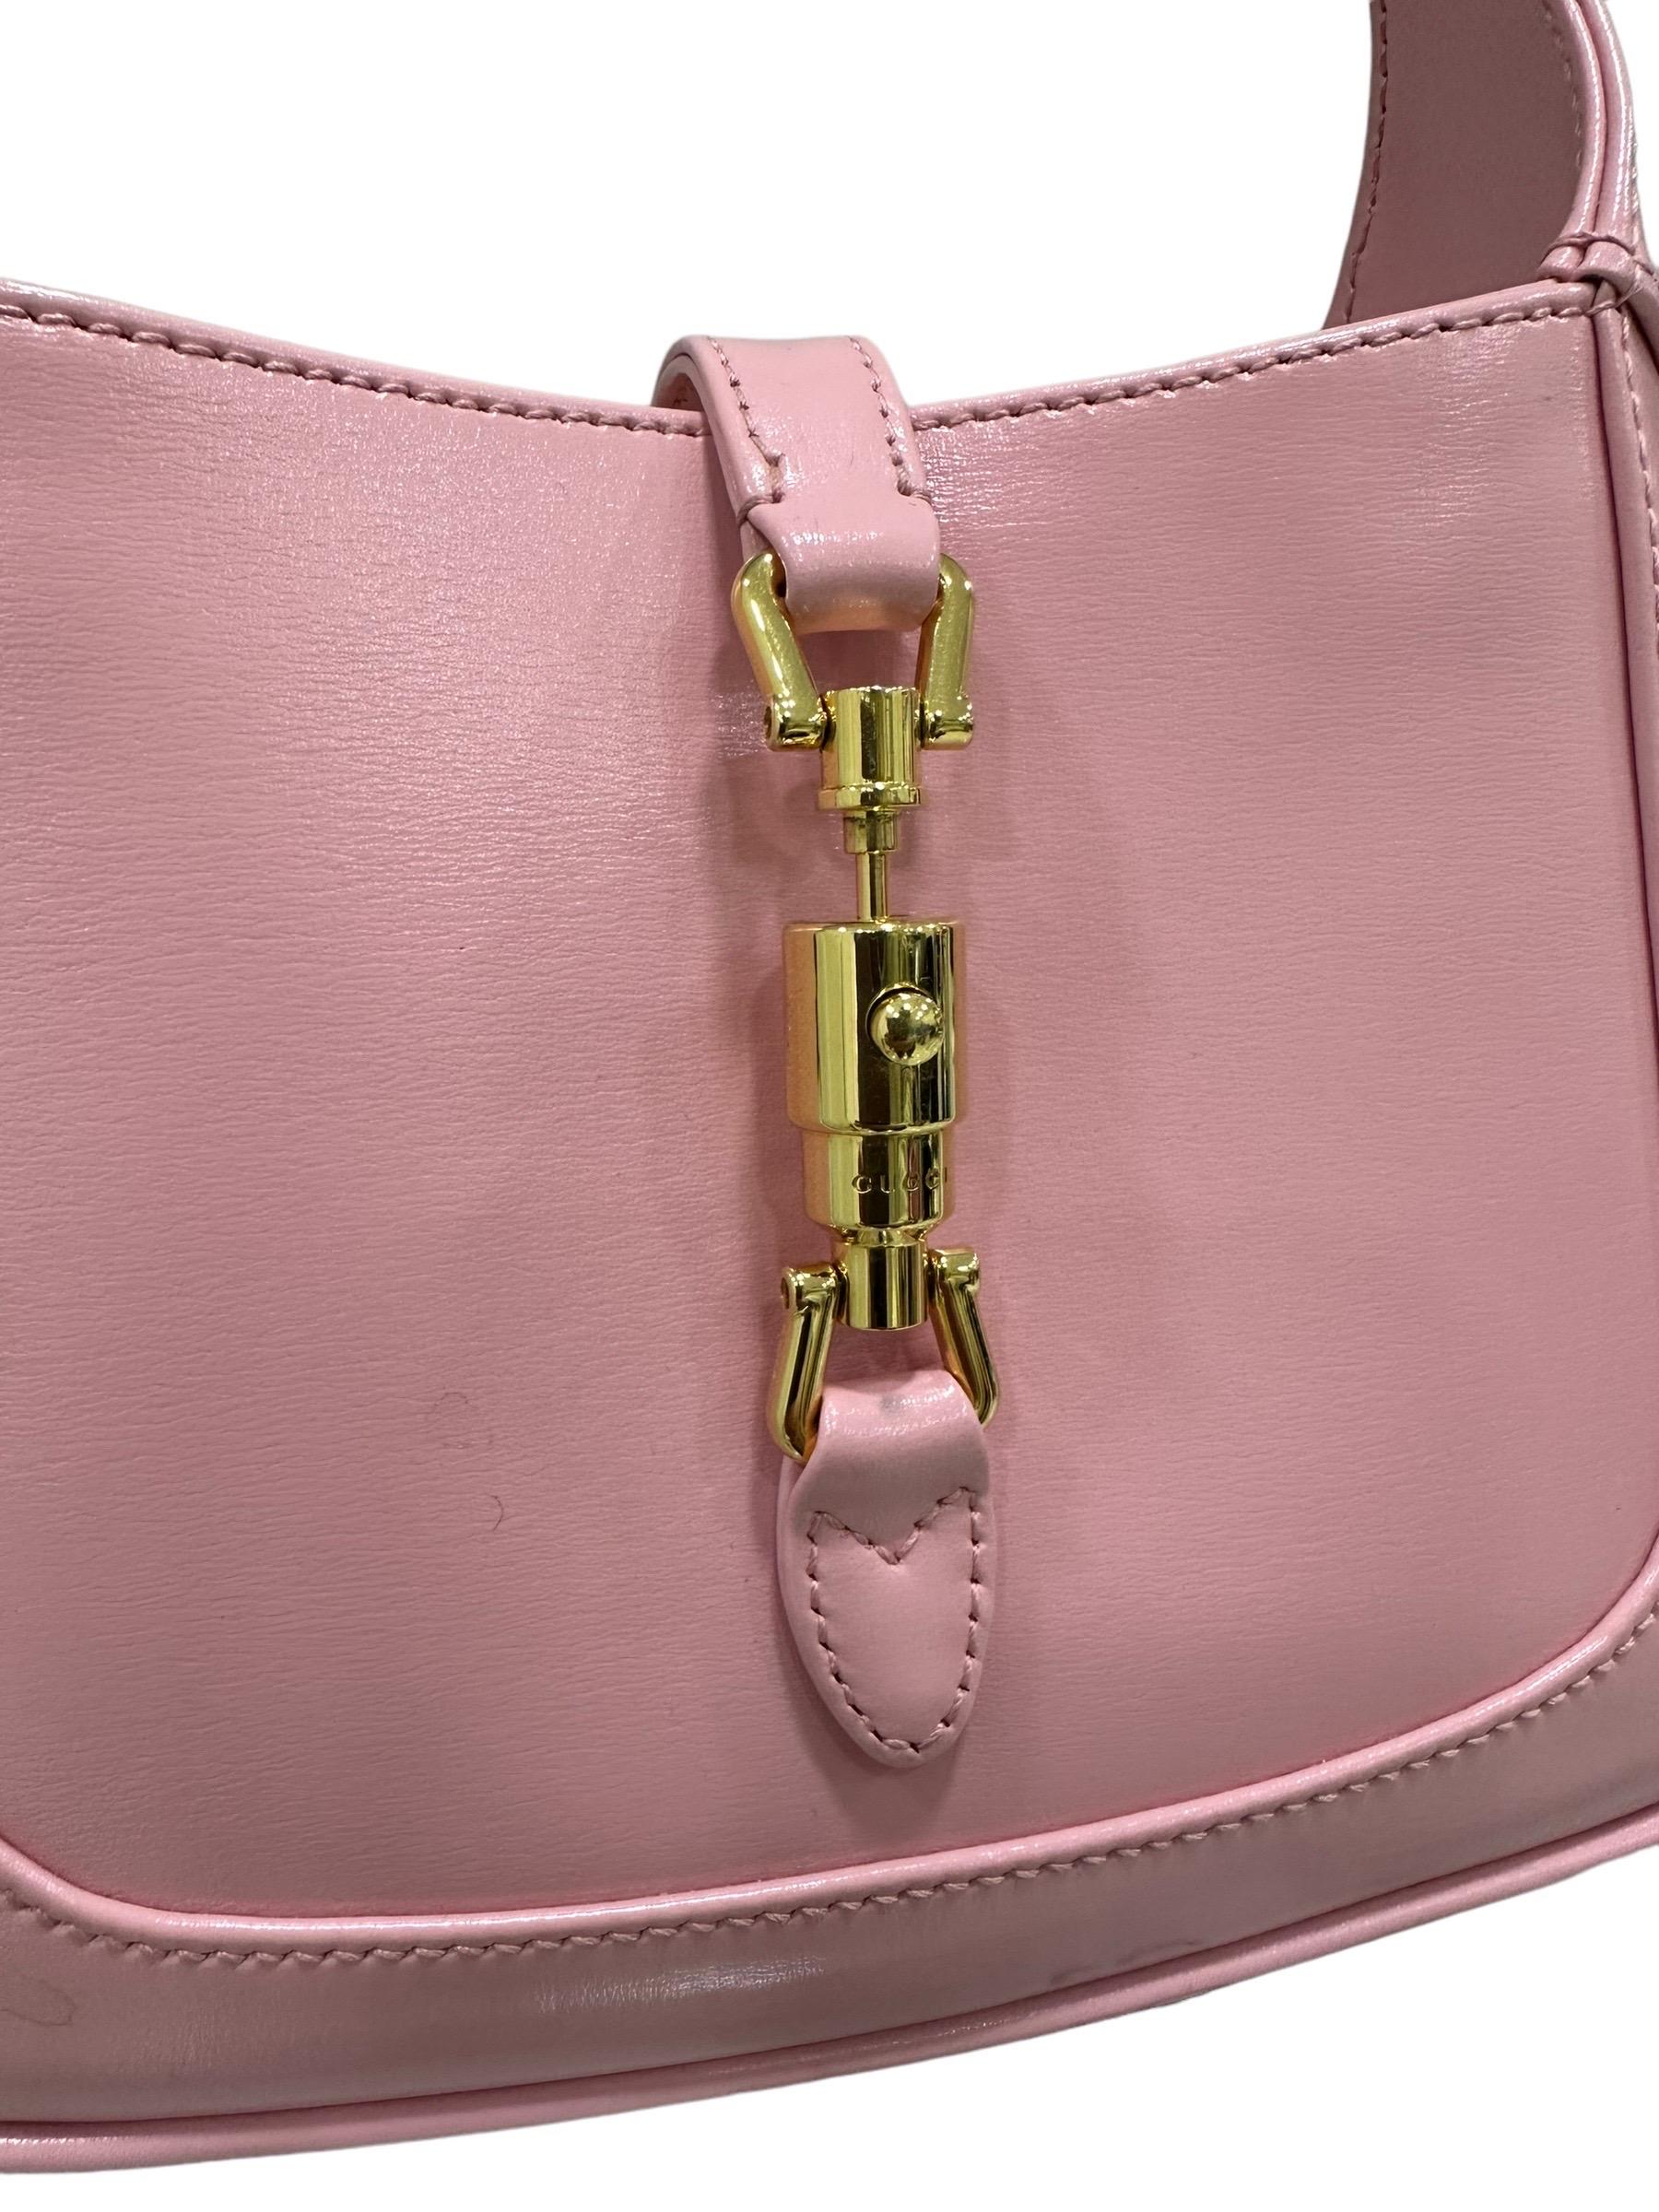 Bag signed Gucci, model Jackie 1961, size Mini, made in pink smooth leather with golden hardware. Equipped with a closure with a small central band with interlocking closure, internally lined in smooth beige leather, roomy for the essentials.